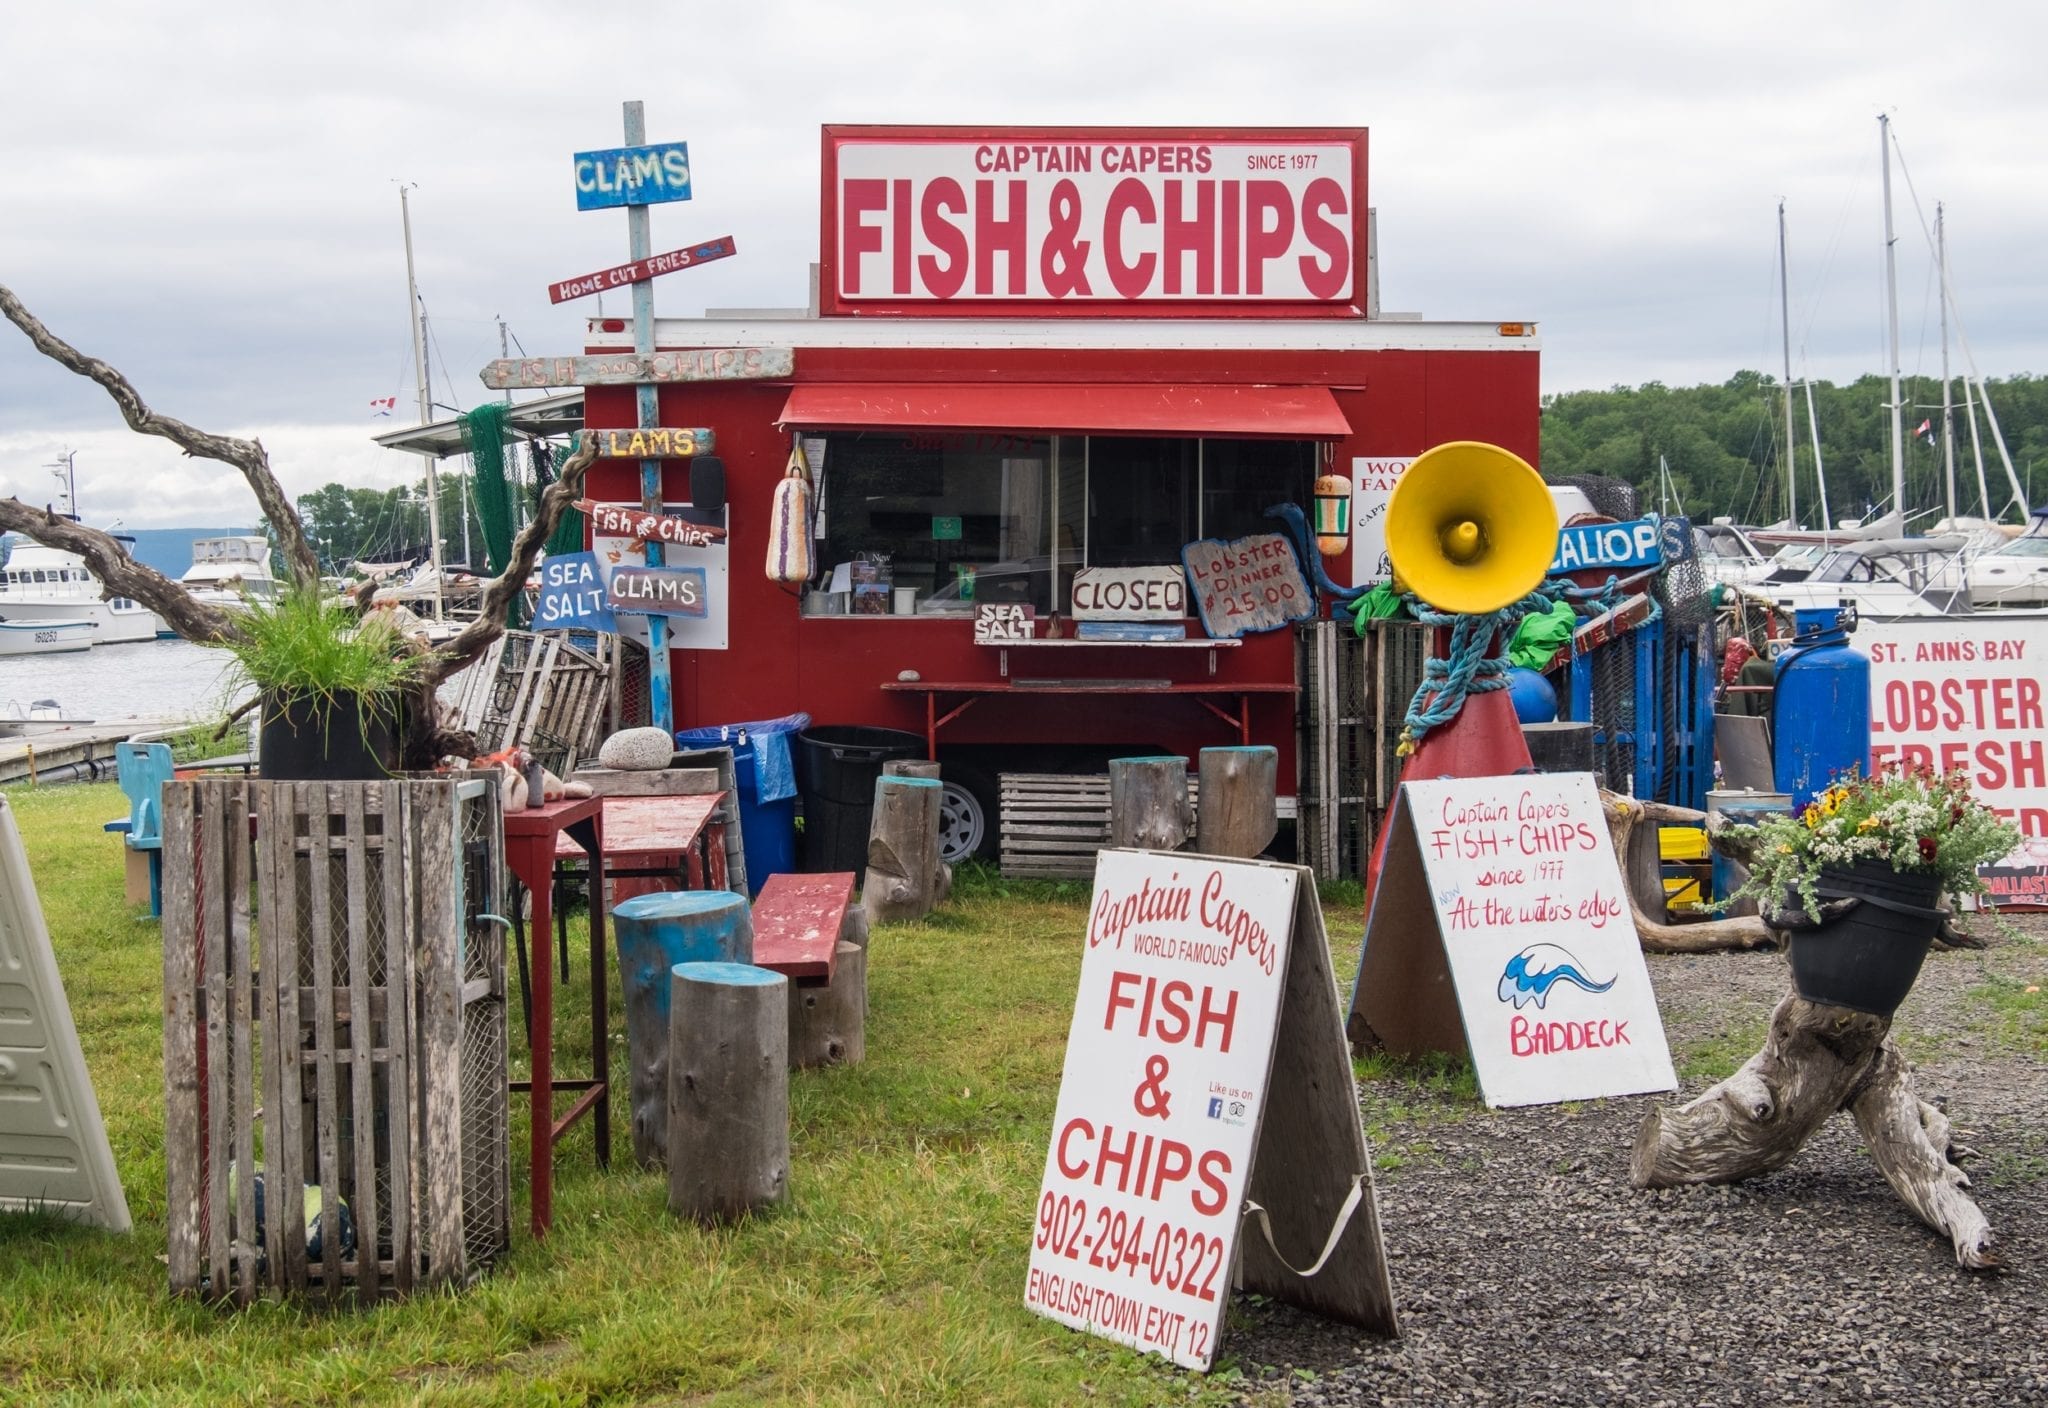 A red fish and chips food stand in front boats in Baddeck, Novia Scotia with signs saying "Fish and Chips" and tree stumps to sit on